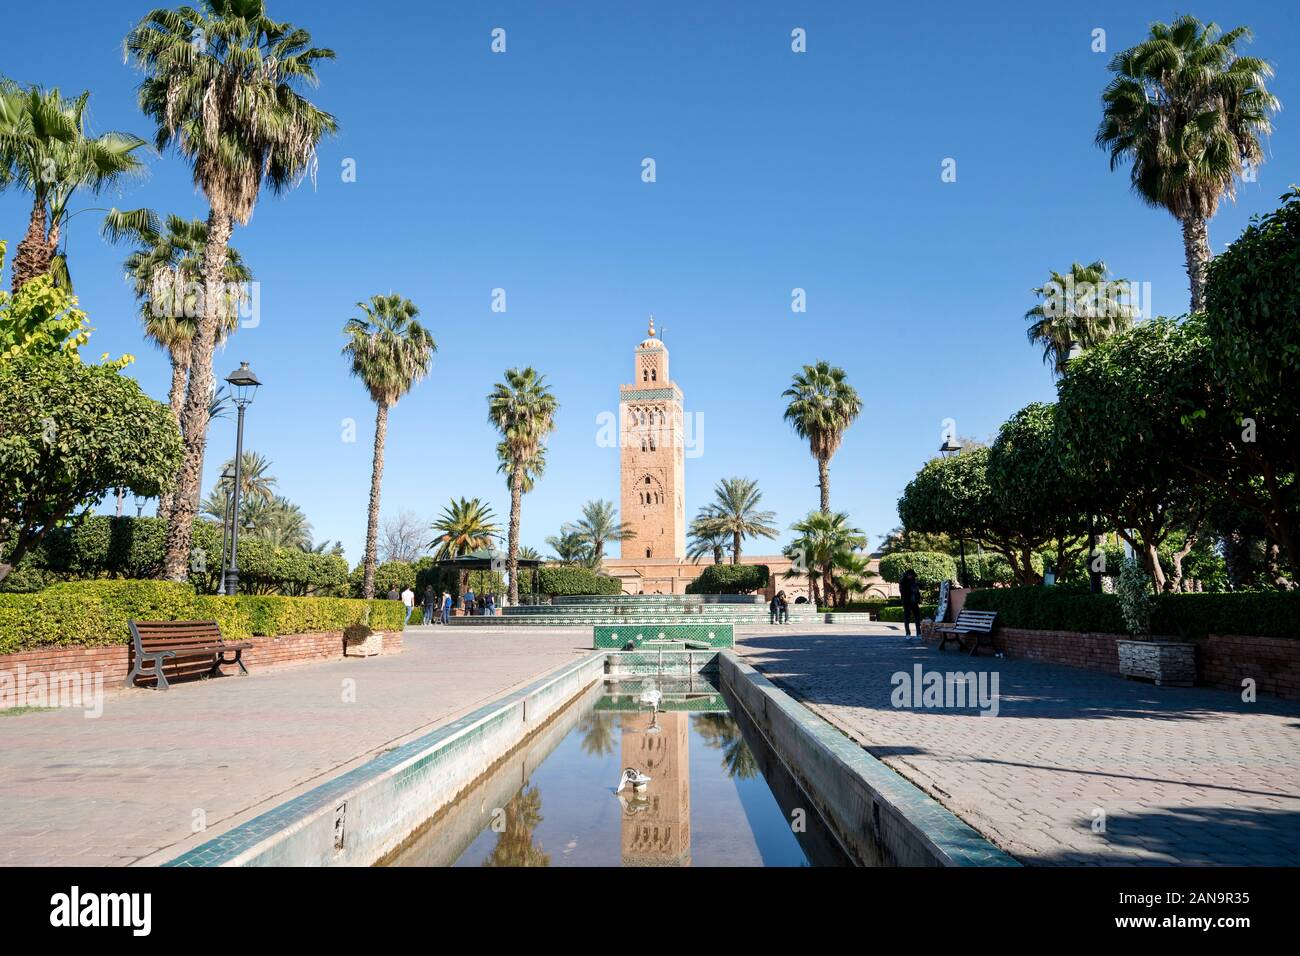 Koutoubia mosque from 12th century in old town of Marrakech, Morocco Stock Photo